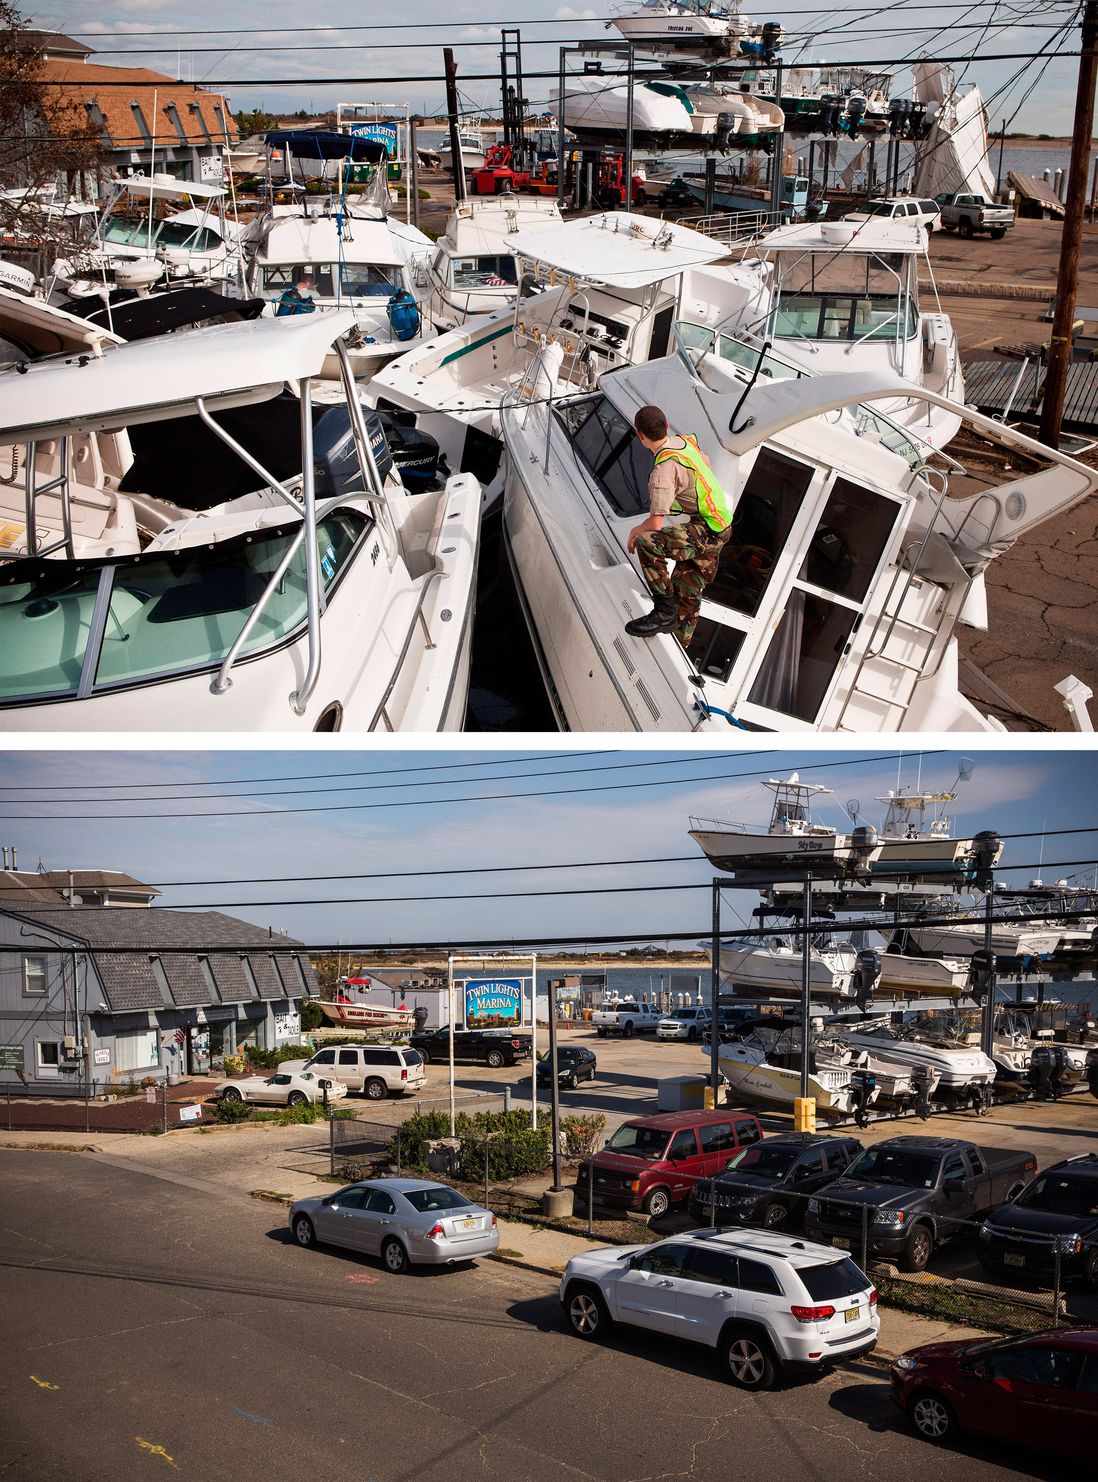 [Top] A volunteer surveys a pile of boats, which were moved by Superstorm Sandy, on November 1, 2012 in Highlands, New Jersey. [Bottom] Boats are stored at a marina in Highlands, New Jersey October 22, 2013.